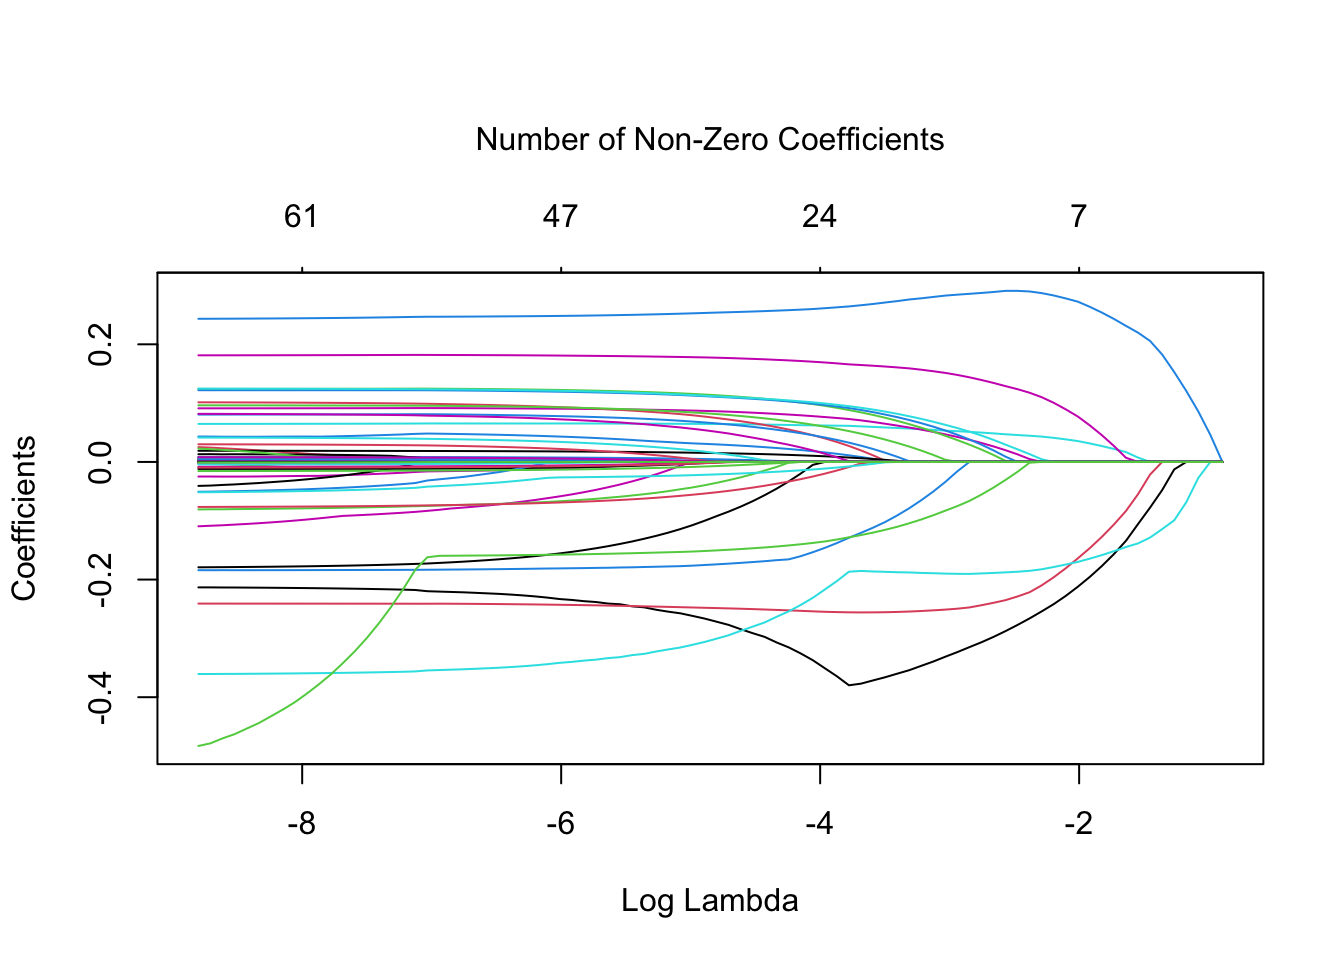 Estimated coefficients as a function of lambda